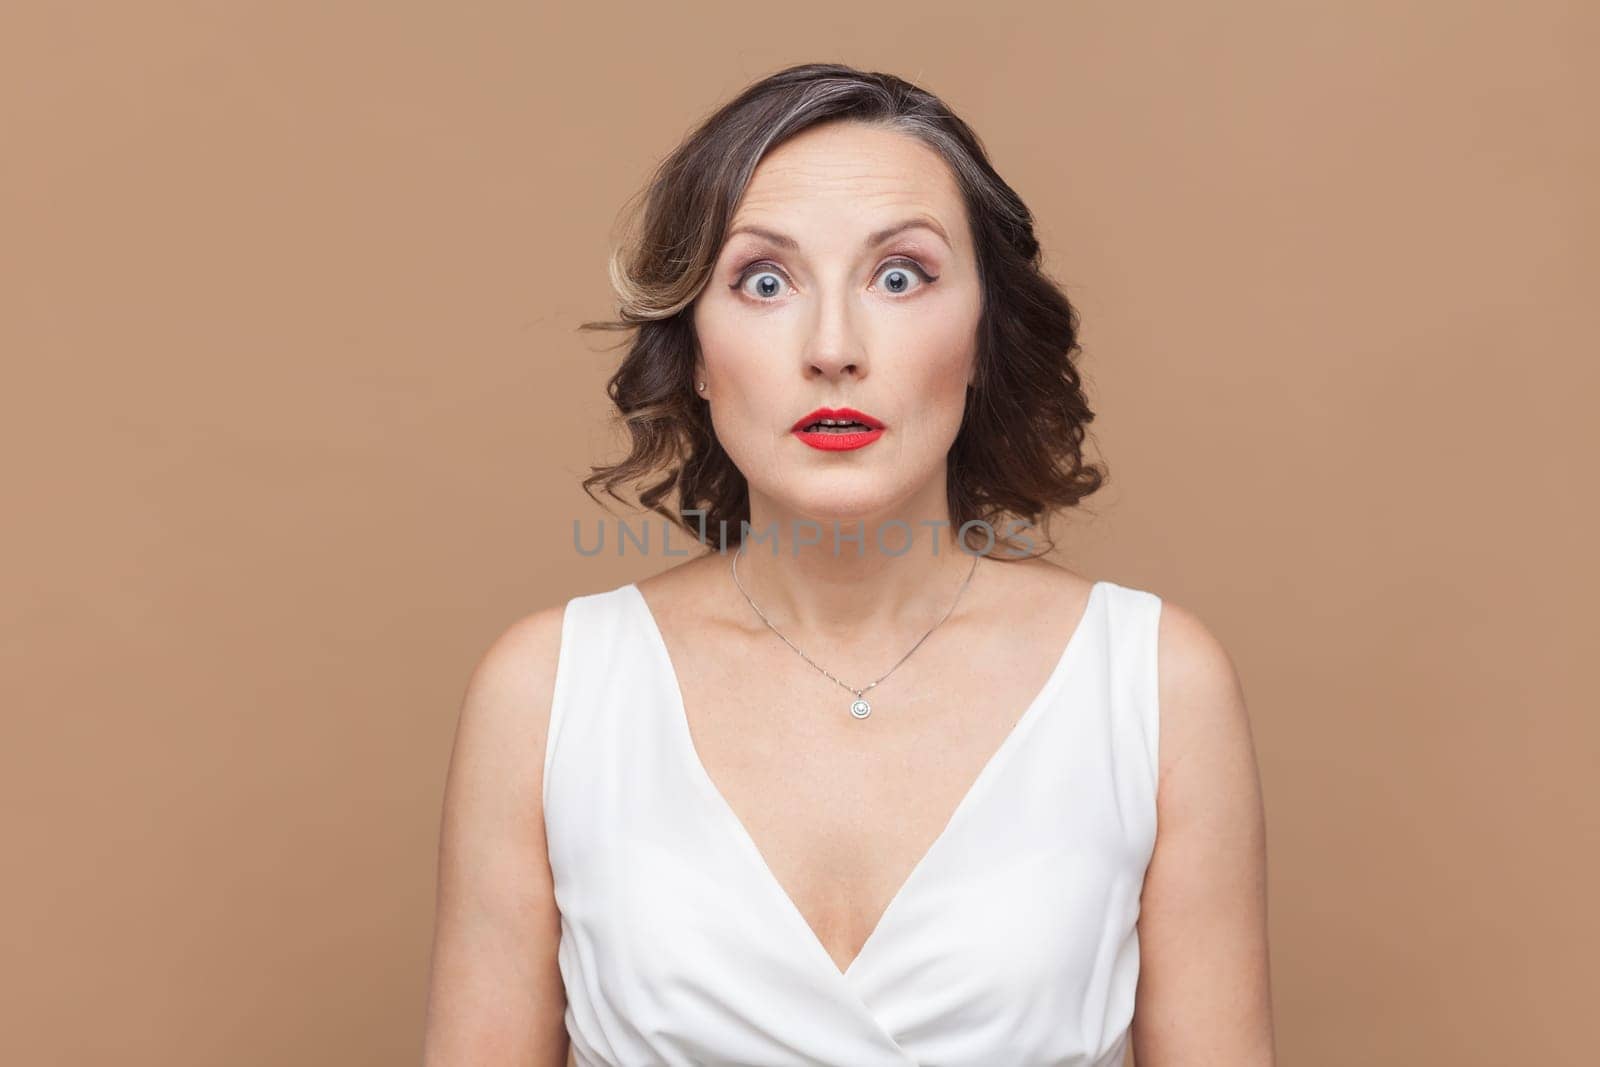 Portrait of shocked astonished middle aged woman with wavy hair looking at camera with big eyes, sees something excited, wearing white dress. Indoor studio shot isolated on light brown background.